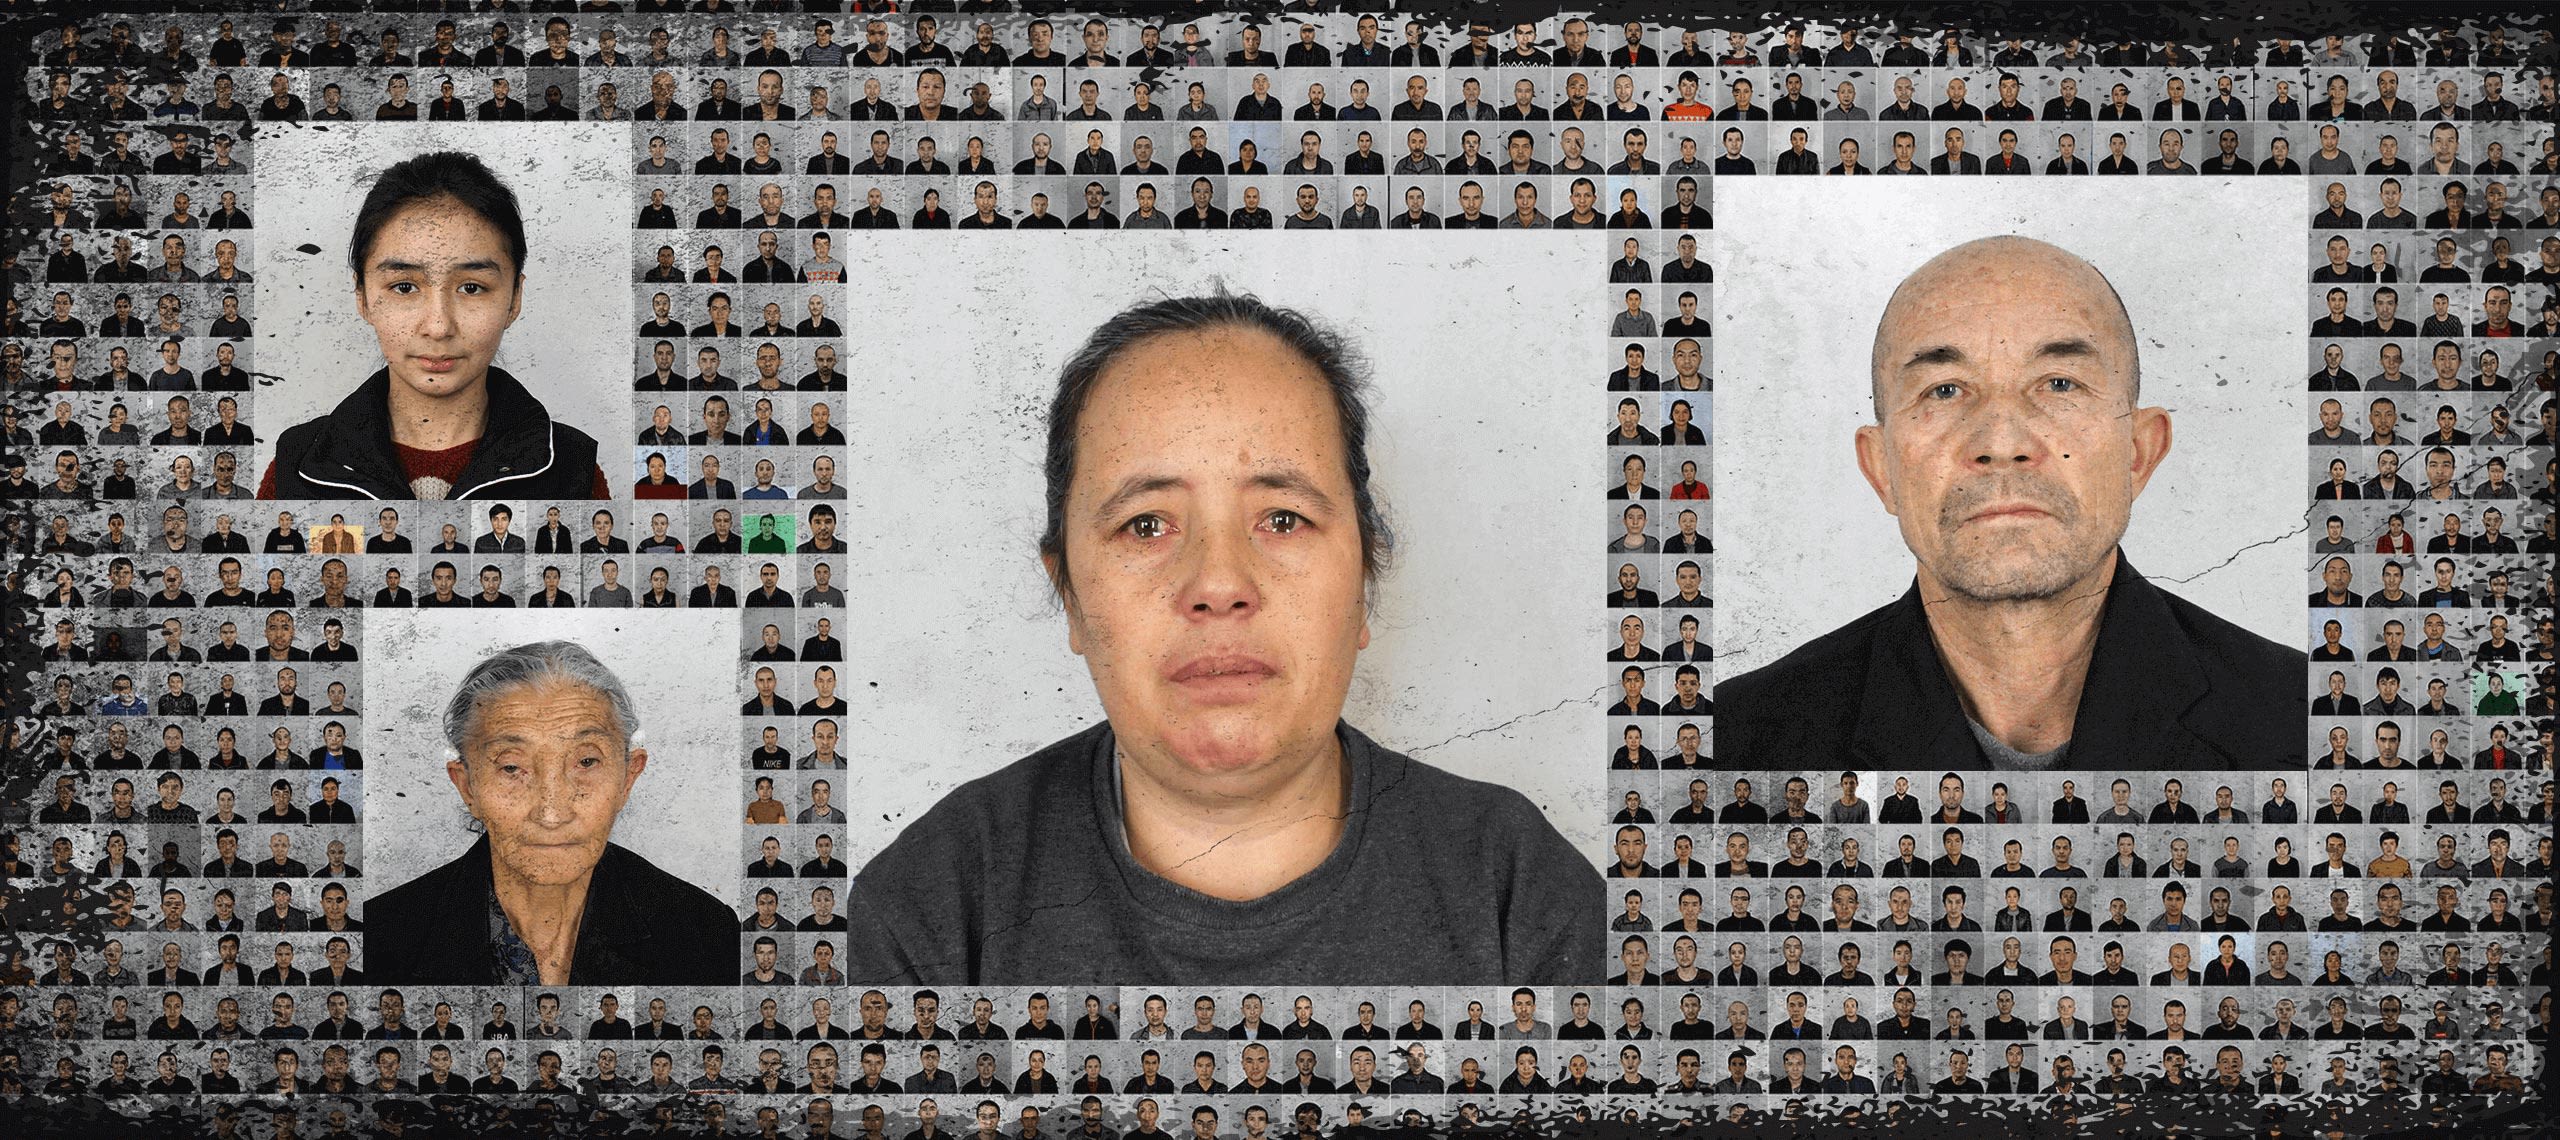 The faces from China’s Uyghur detention camps